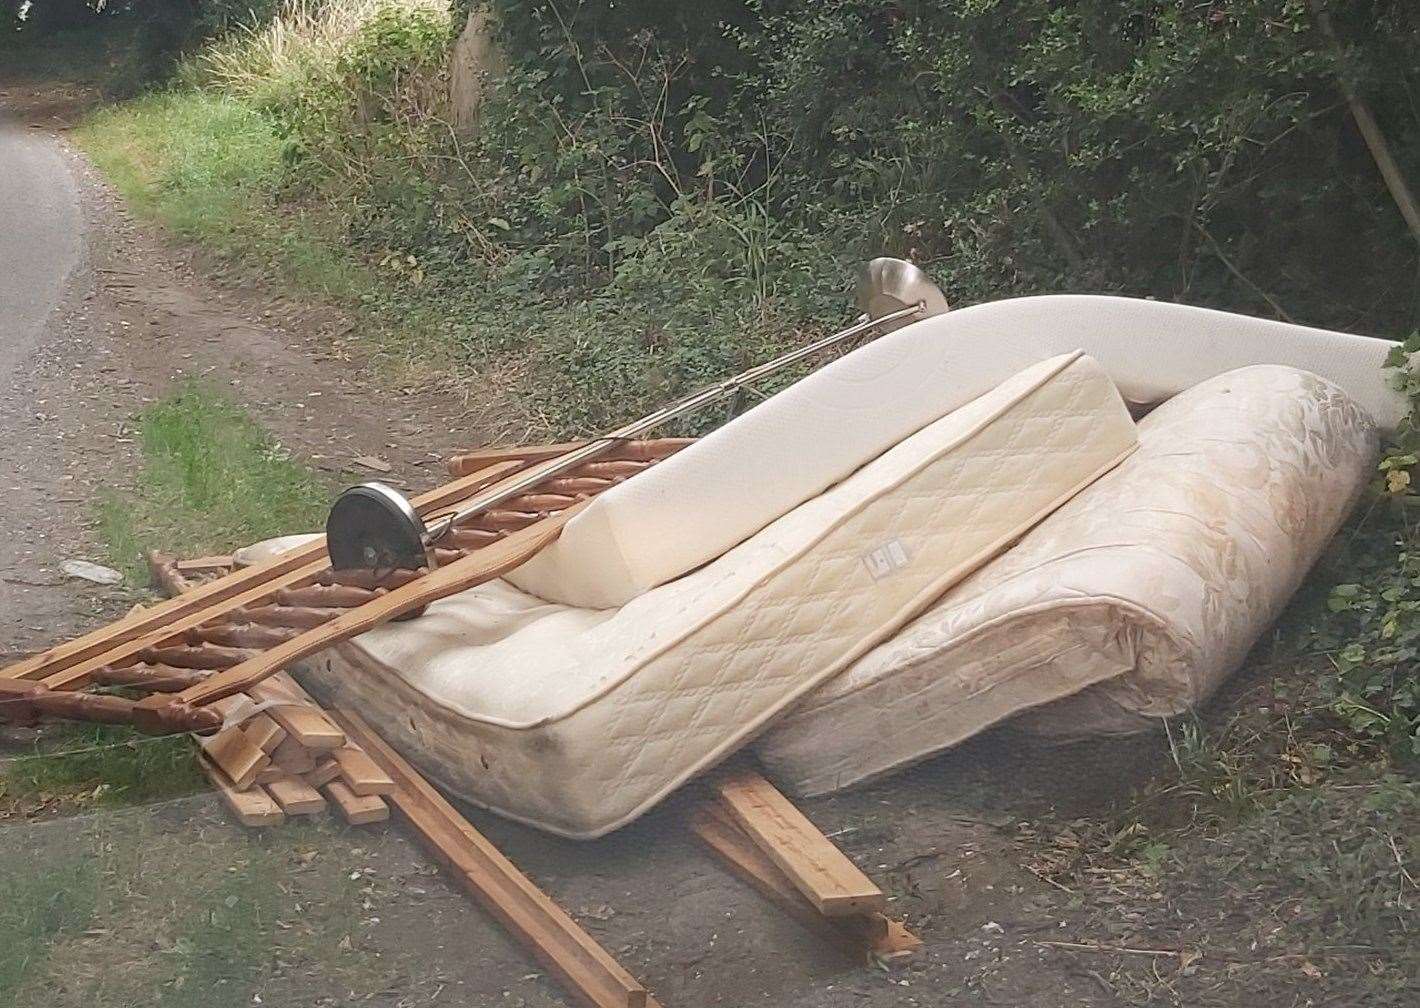 Bedroom furniture, including a mattress and lamp, were some items fly-tipped in Gravesham. Picture: Kent Police